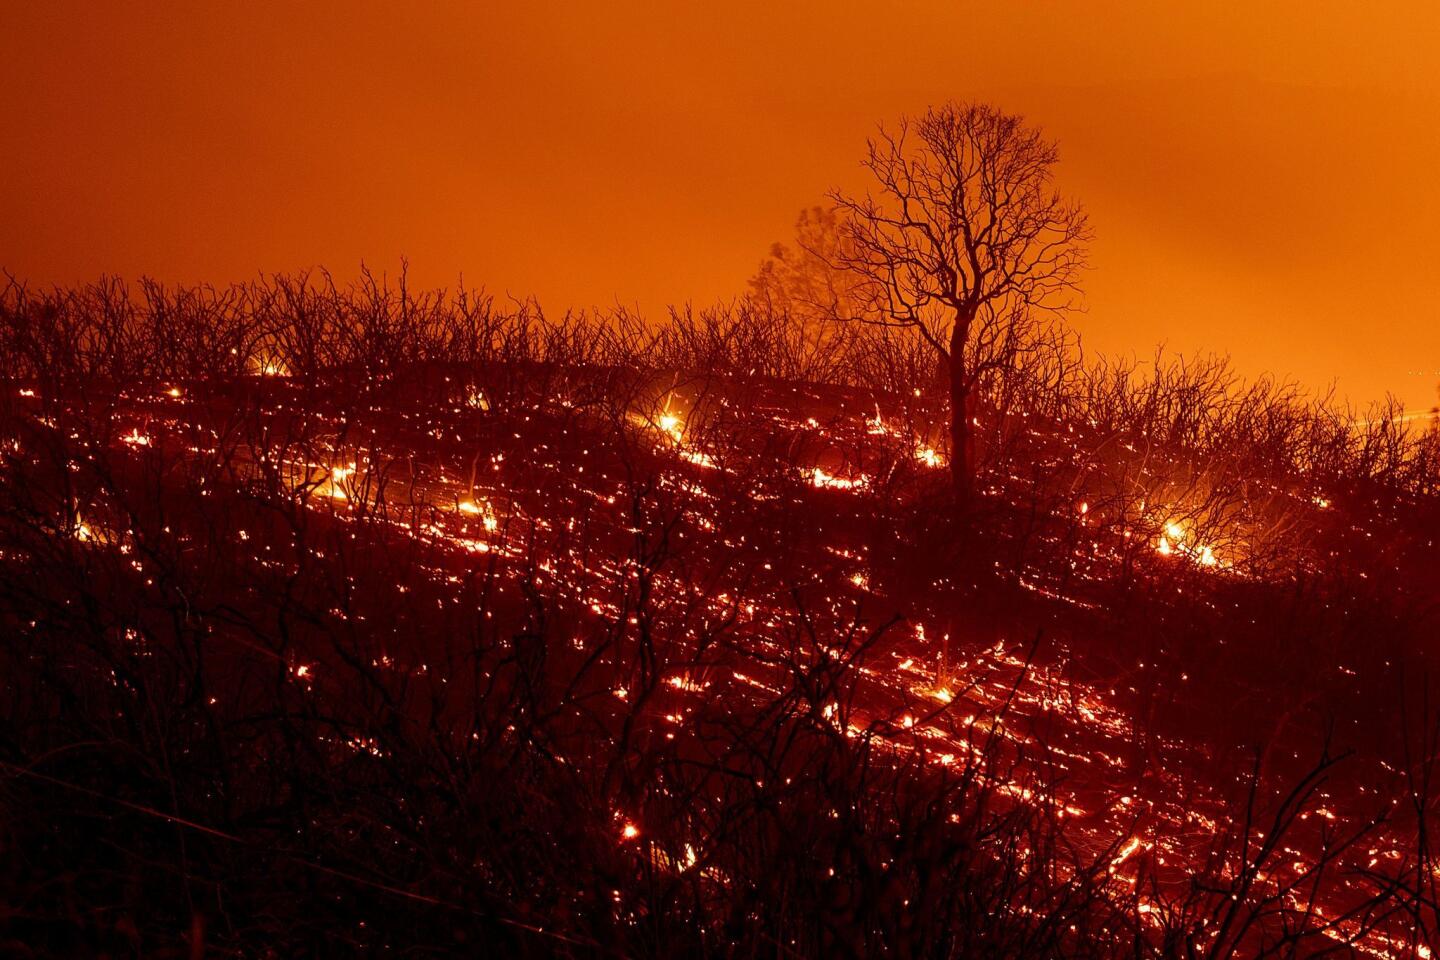 Embers smoulder along a hillside after the Ranch Fire, part of the Mendocino Complex Fire, burned though the area near Clearlake Oaks, California, on August 5, 2018. - Several thousand people have been evacuated as various fires swept across the state, although some have been given permission in recent days to return to their homes.